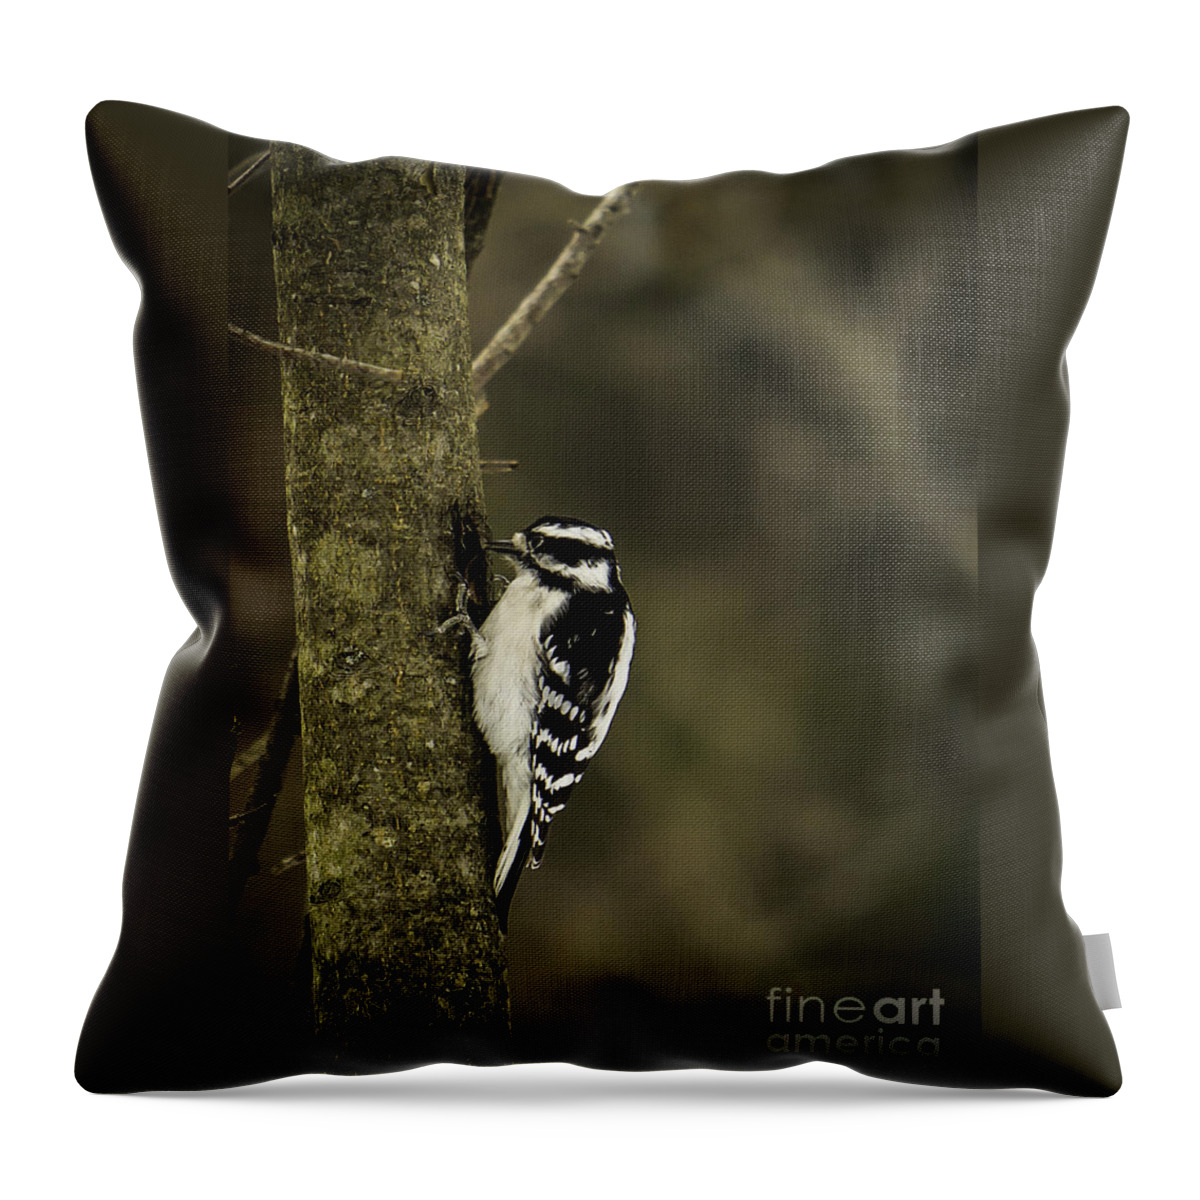 Downy Throw Pillow featuring the photograph Downy Woodpecker by Brad Marzolf Photography